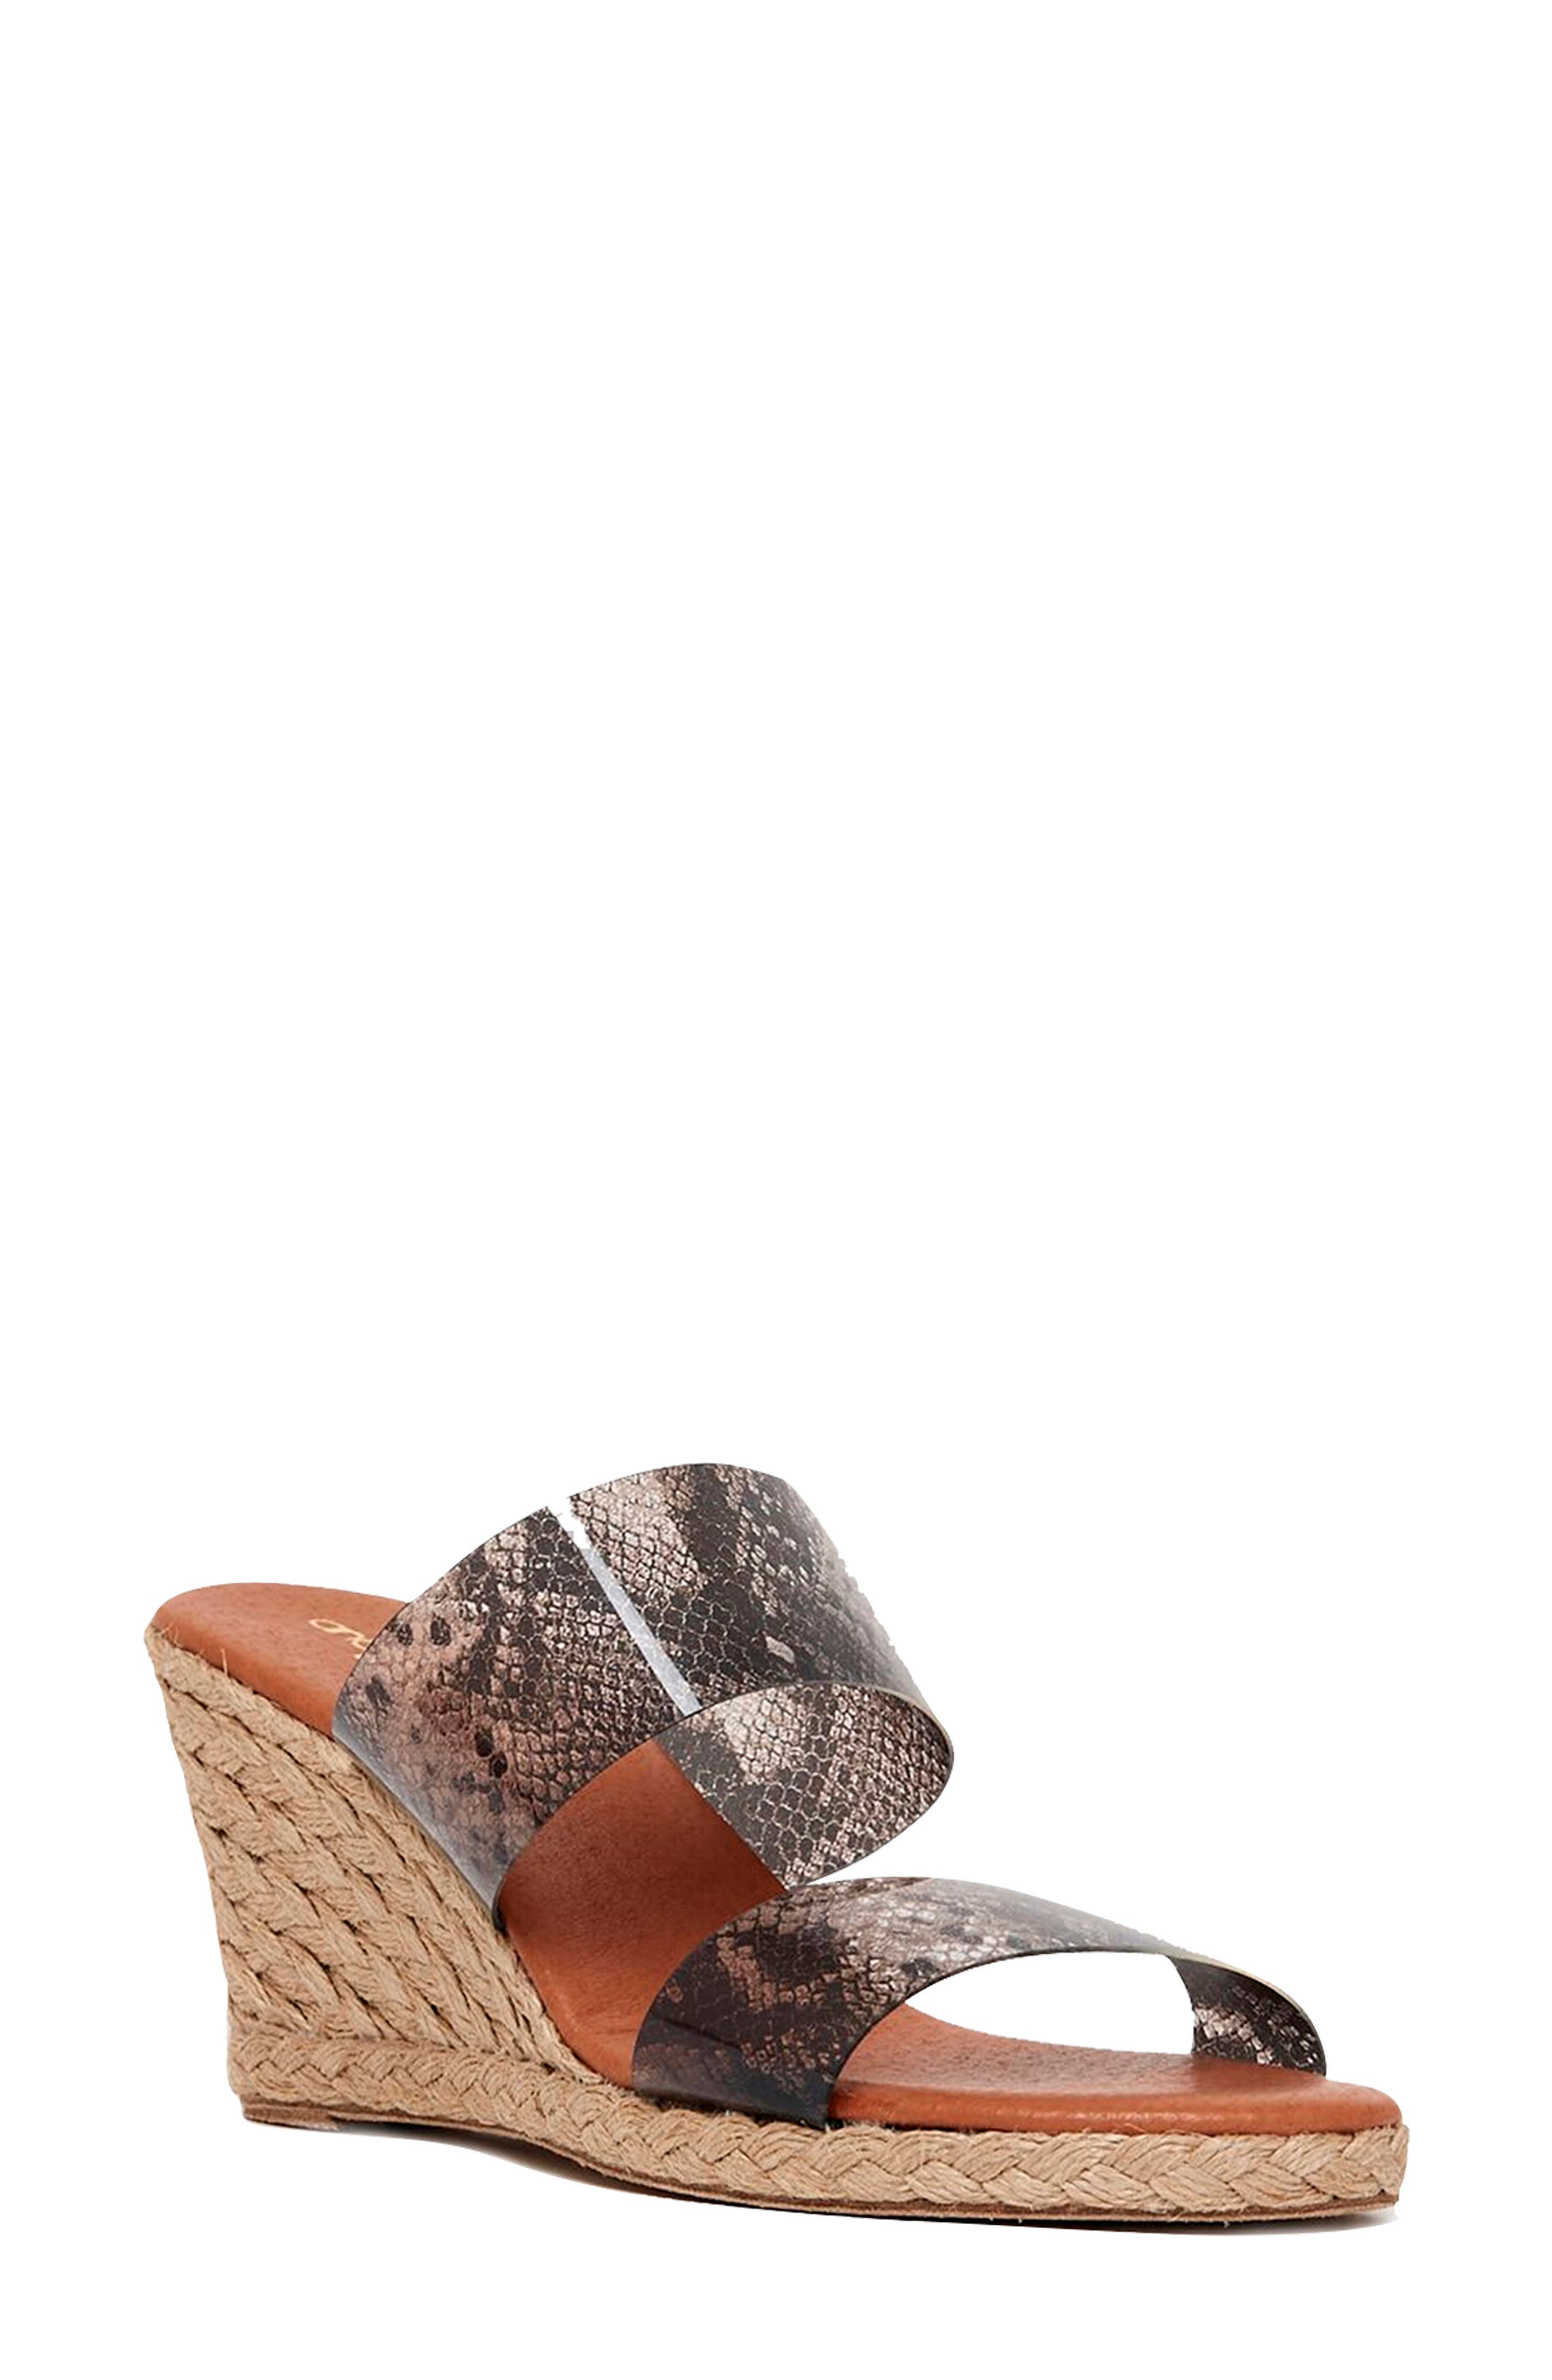 andre assous anfisa espadrille wedge sandal